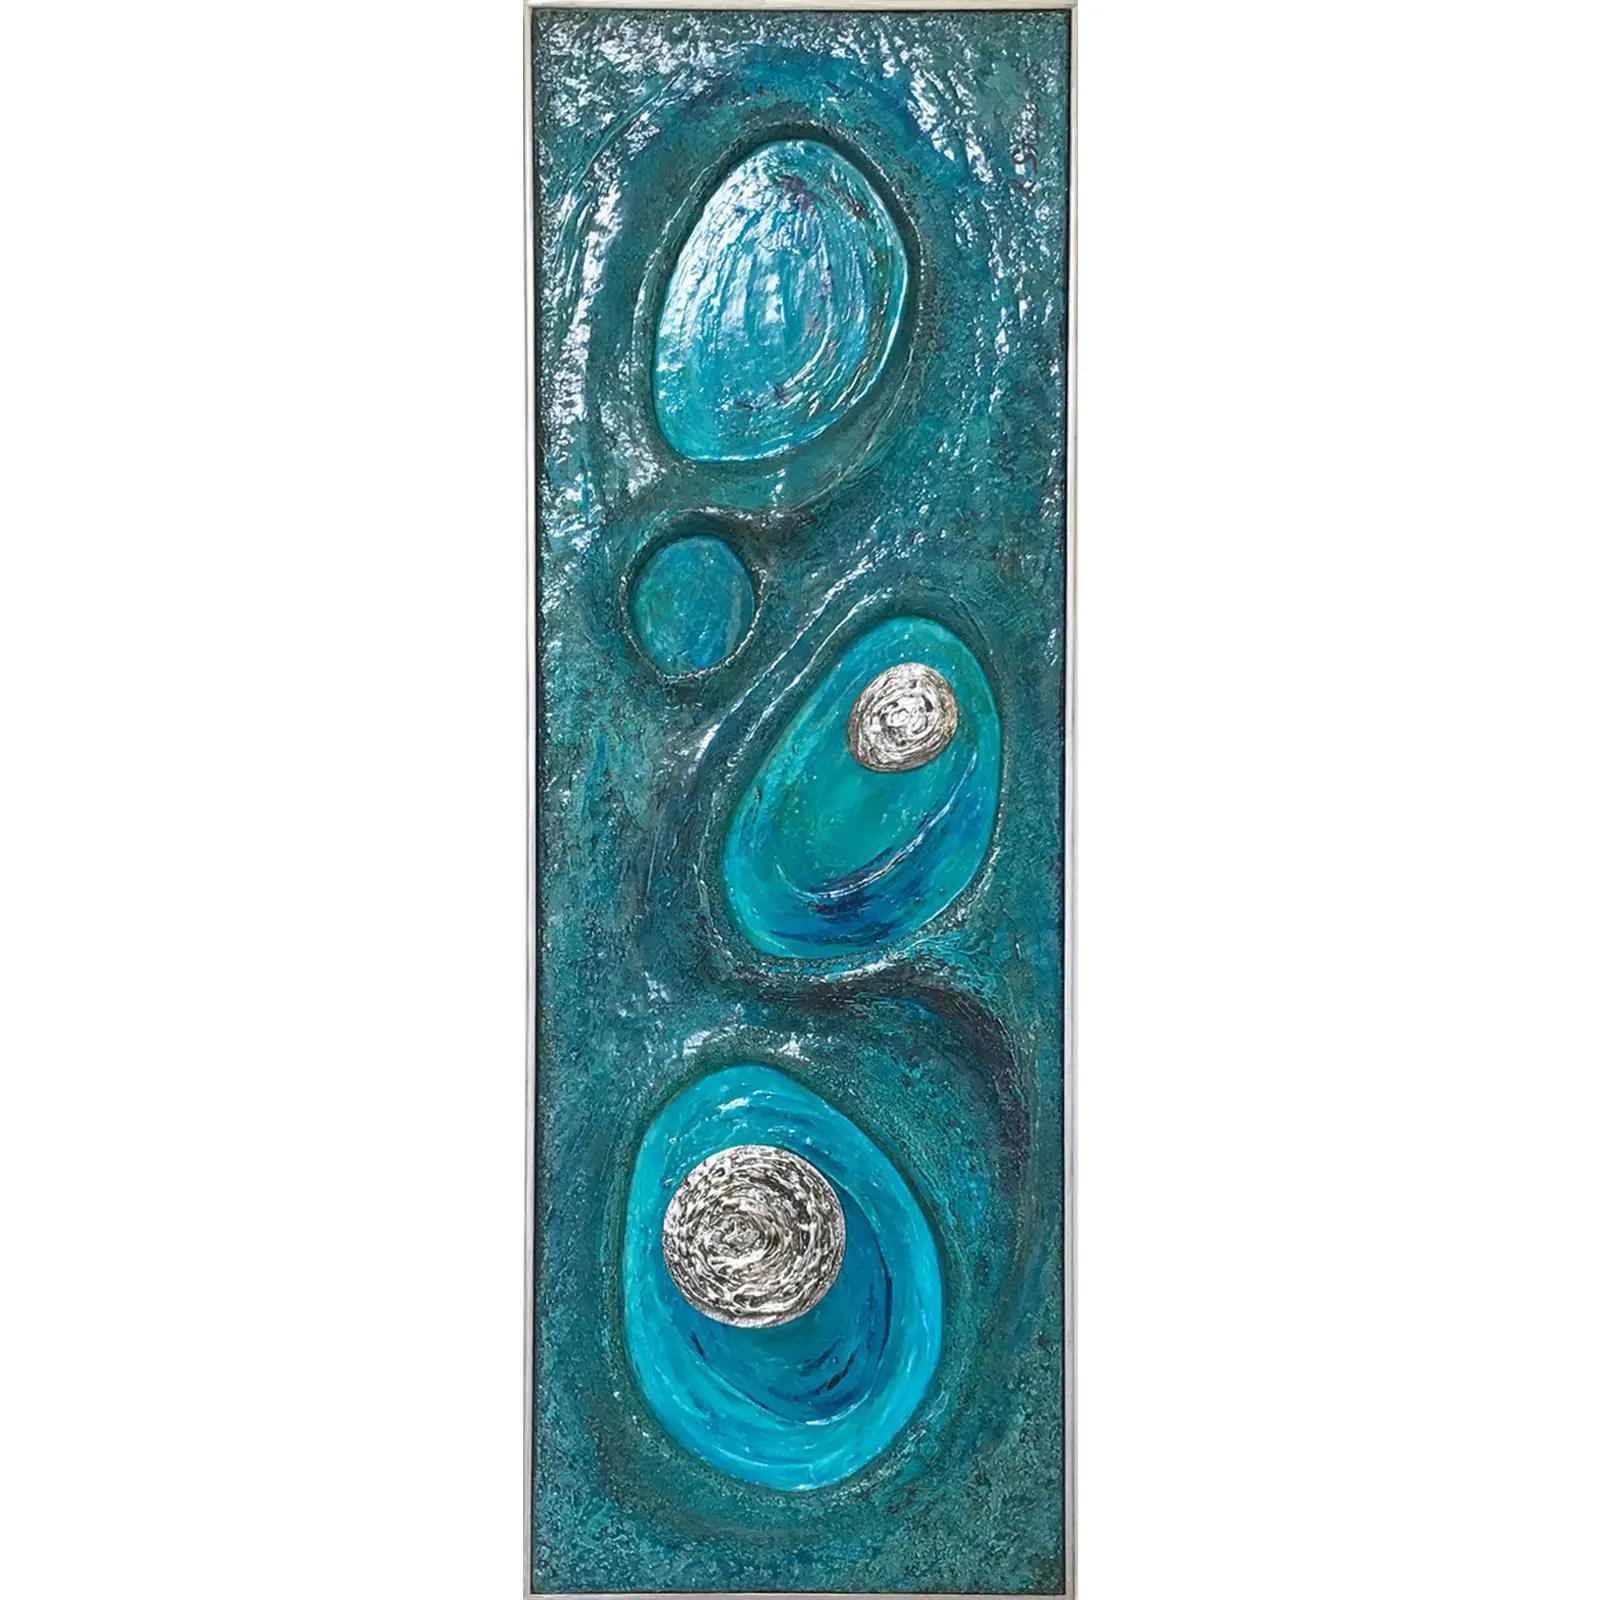 Lorraine Stelzer Turquoise Acrylic Resin Psychedelic Art Wall Sculpture Panel For Sale 6